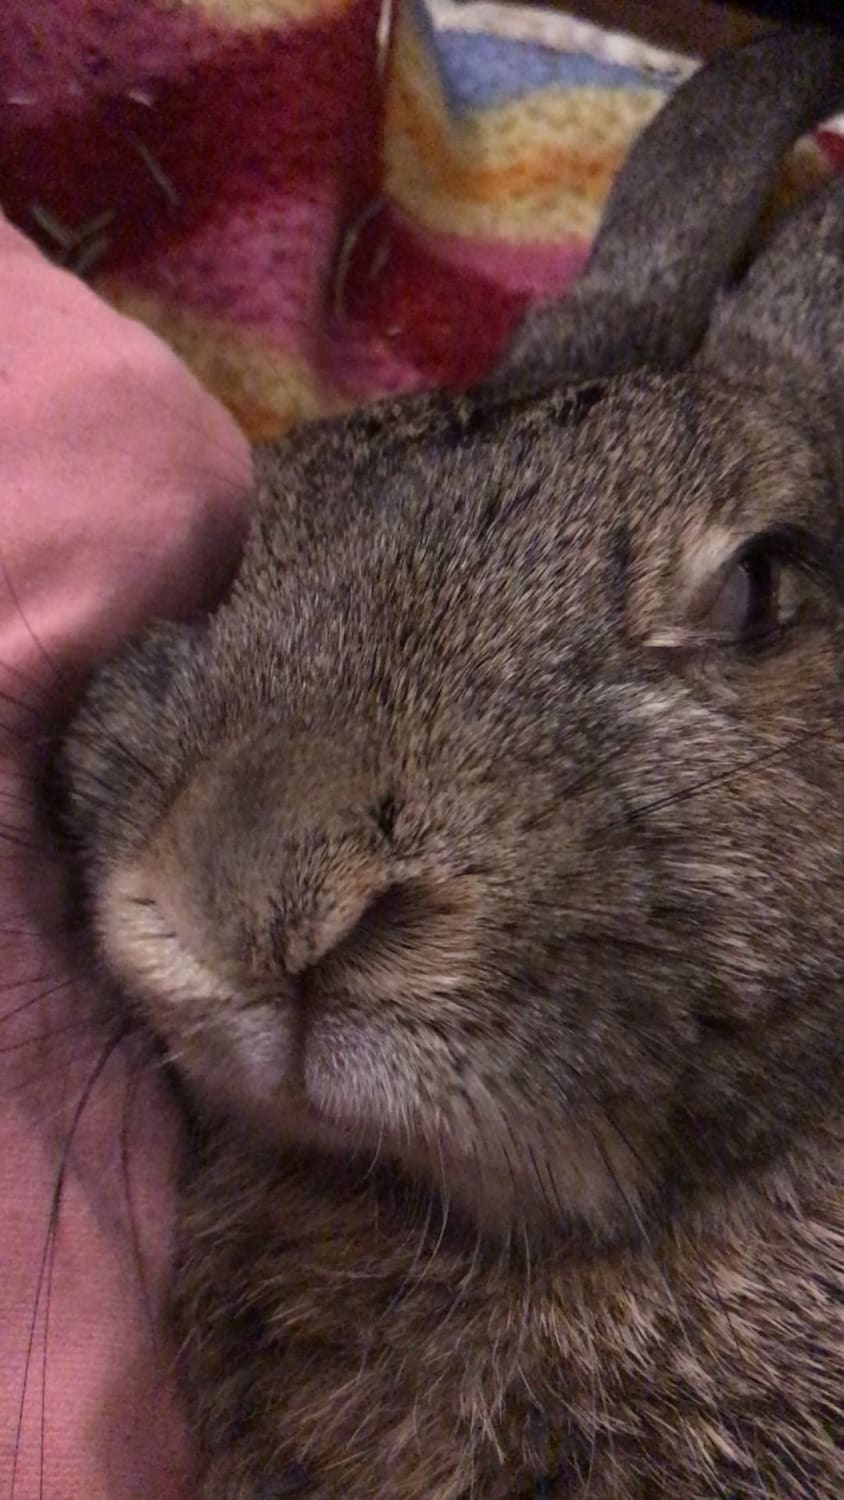 Day 5 of treating EC, day 3 of paresis/floppy rabbit syndrome. Here is some post-medicine parsley nomming from our sweet 12.5 year old bun. I know the Black Rabbit of Inle is whispering suggestions to him, but he’s not ready to leave us just yet. We may be making the call soon.